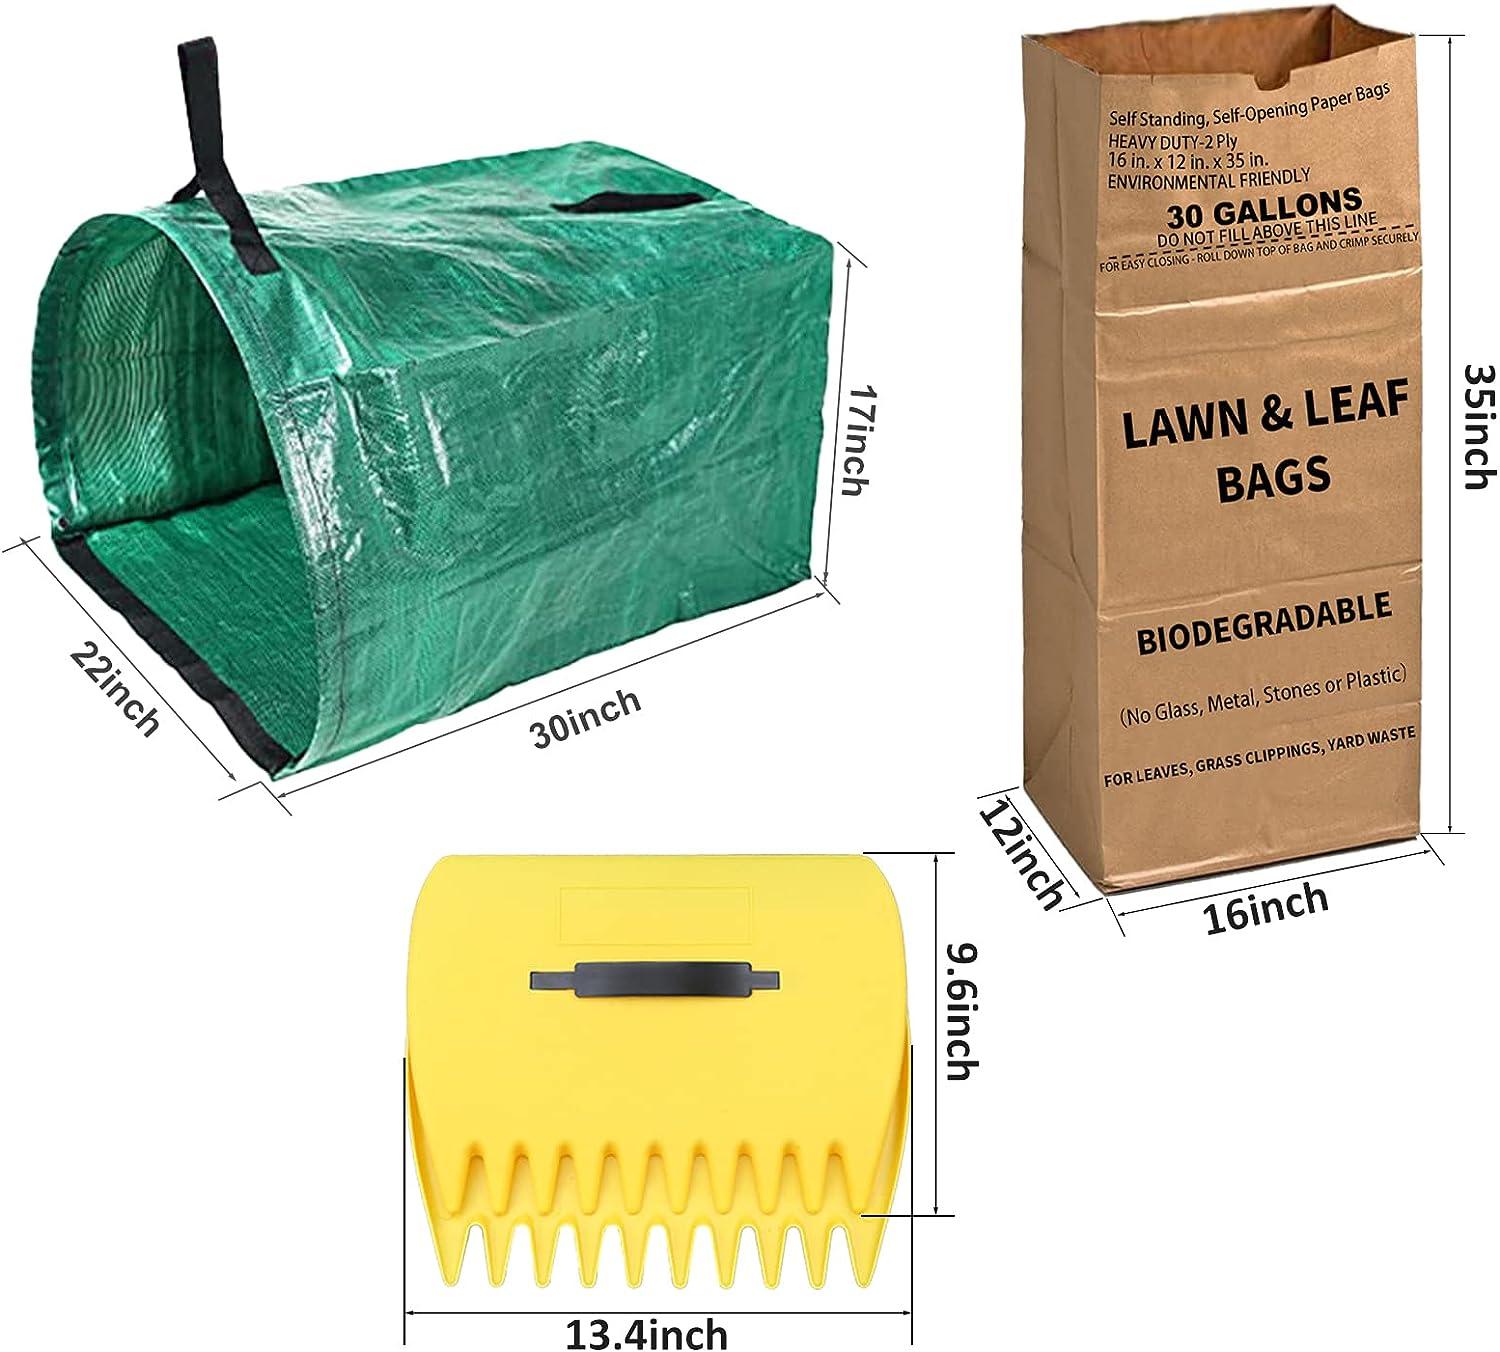 Large Yard Dustpan-Type Garden Bag for Collecting Leaves - Reuseable Heavy Duty Gardening Bags, Lawns Pool Garden Leaf Waste Bag - 53 Gallon per Bag